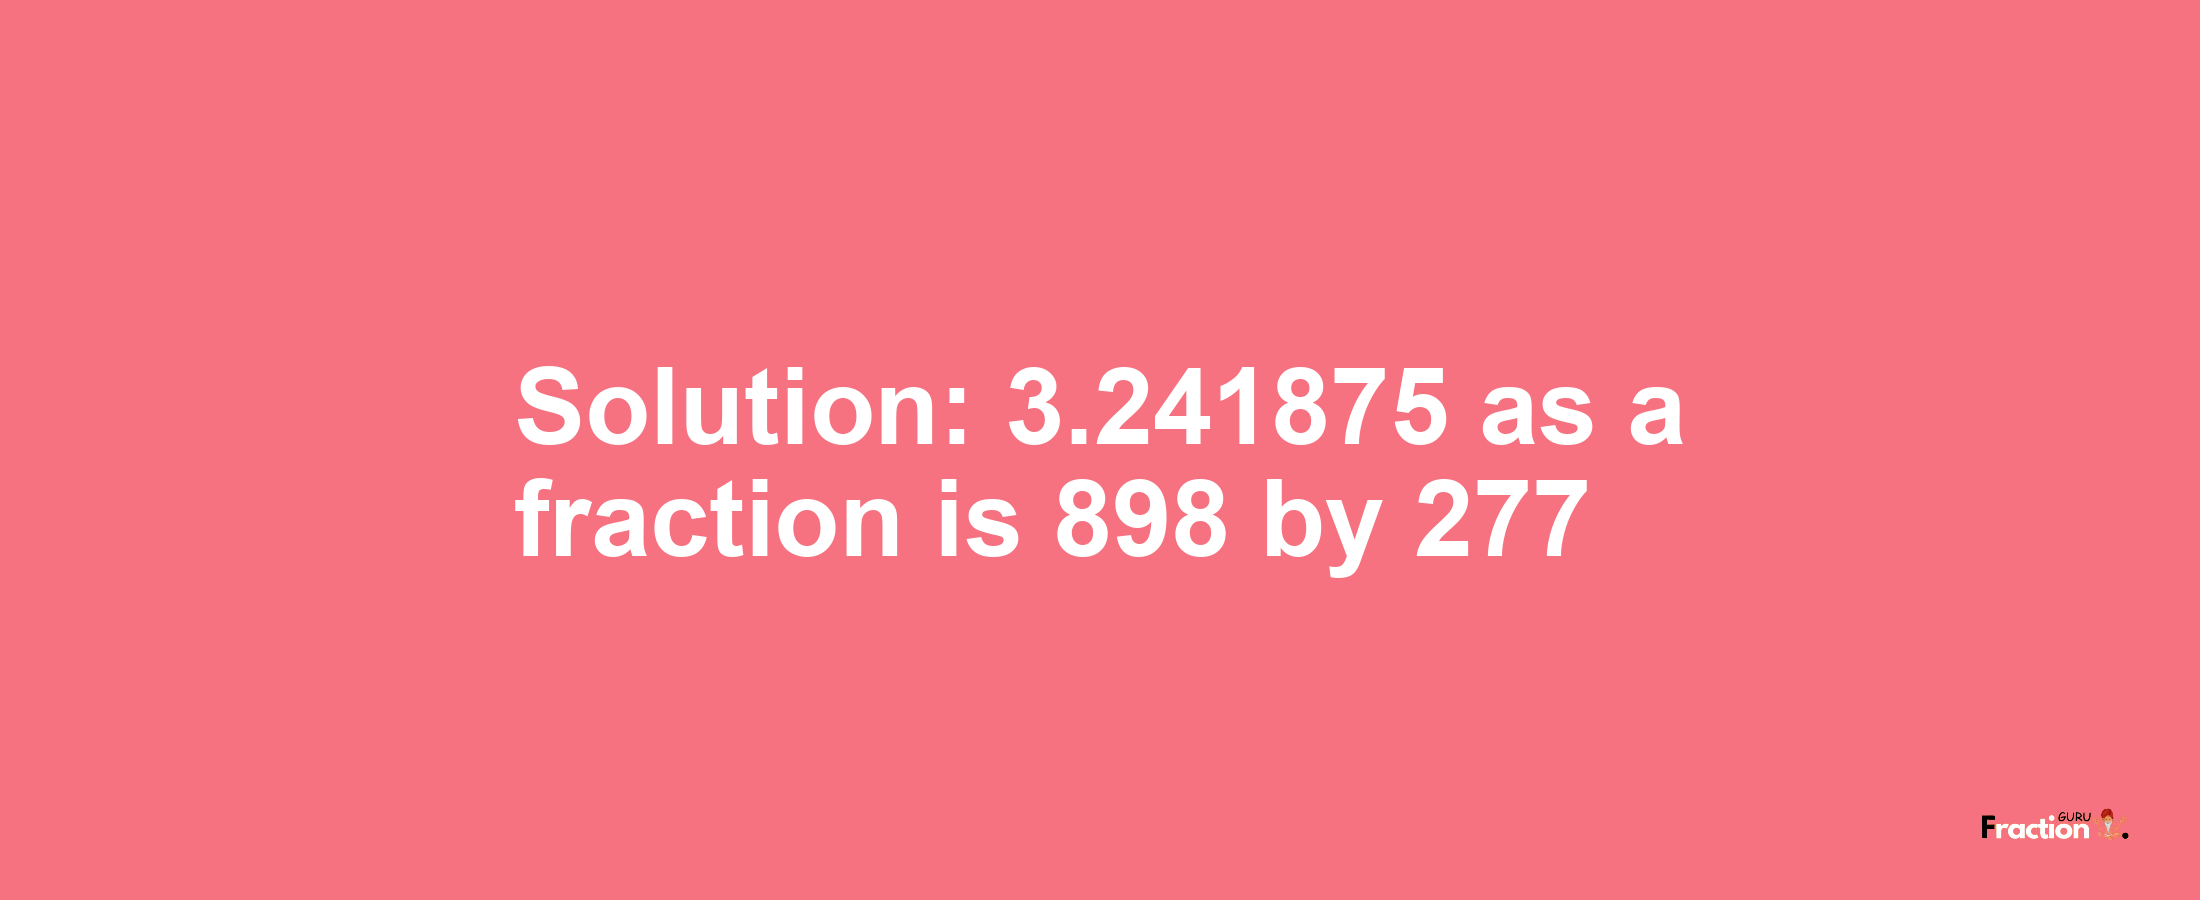 Solution:3.241875 as a fraction is 898/277